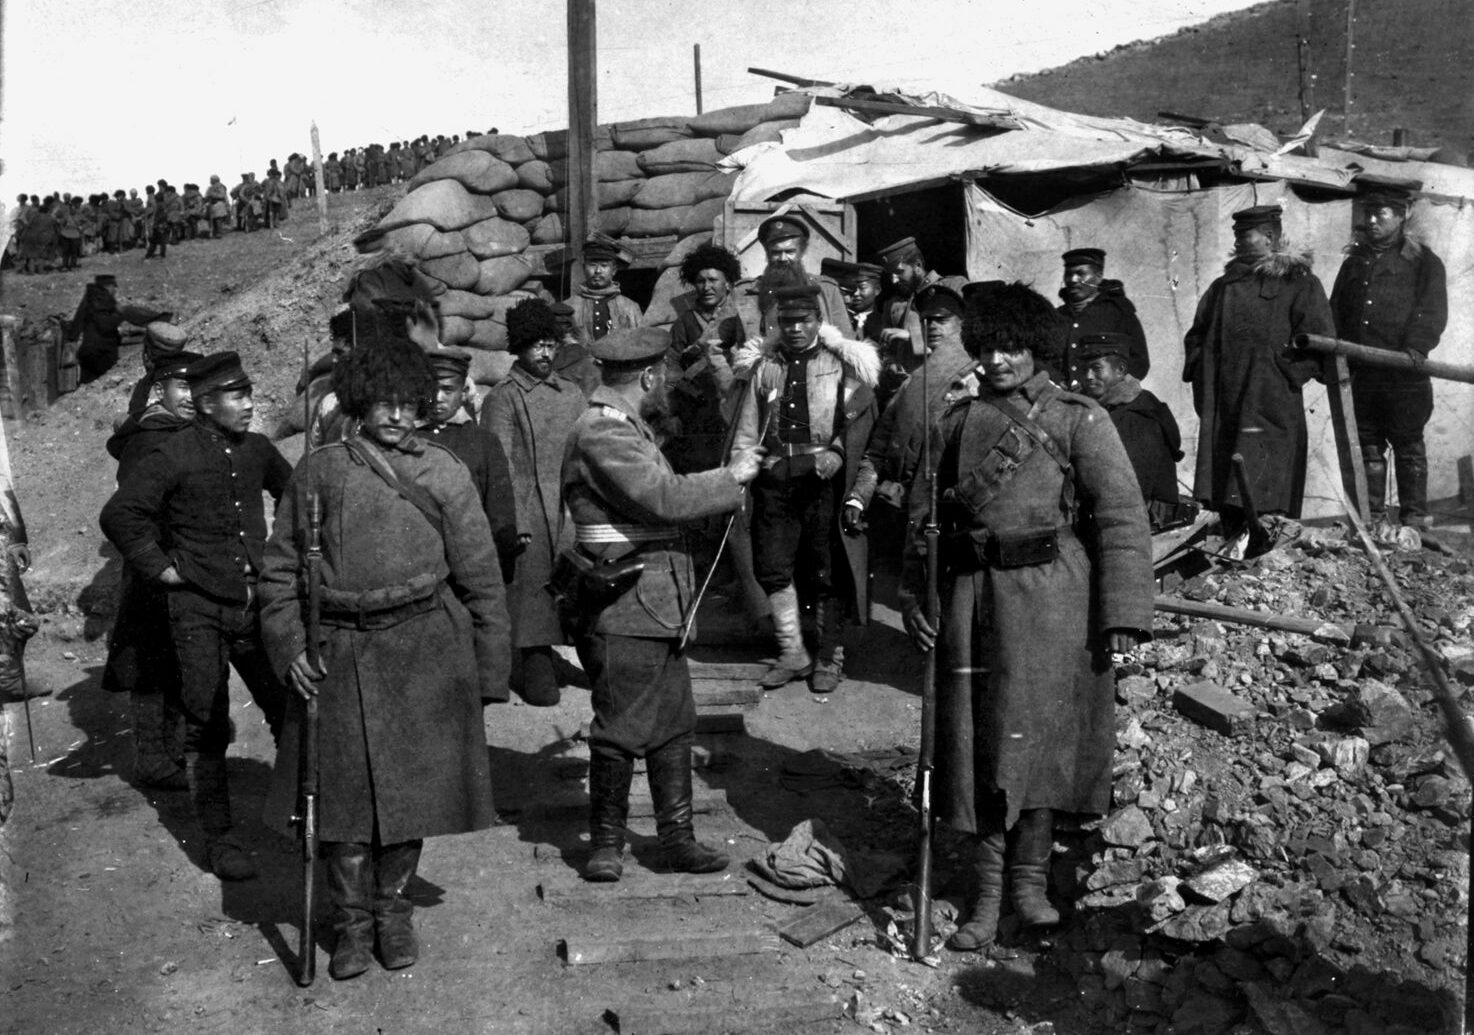 Japanese sentries relieve their Russian counterparts following the formal Russian surrender of Port Arthur on January 1, 1905. The victors sustained at least 60,000 casualties during the brutal five-month siege.